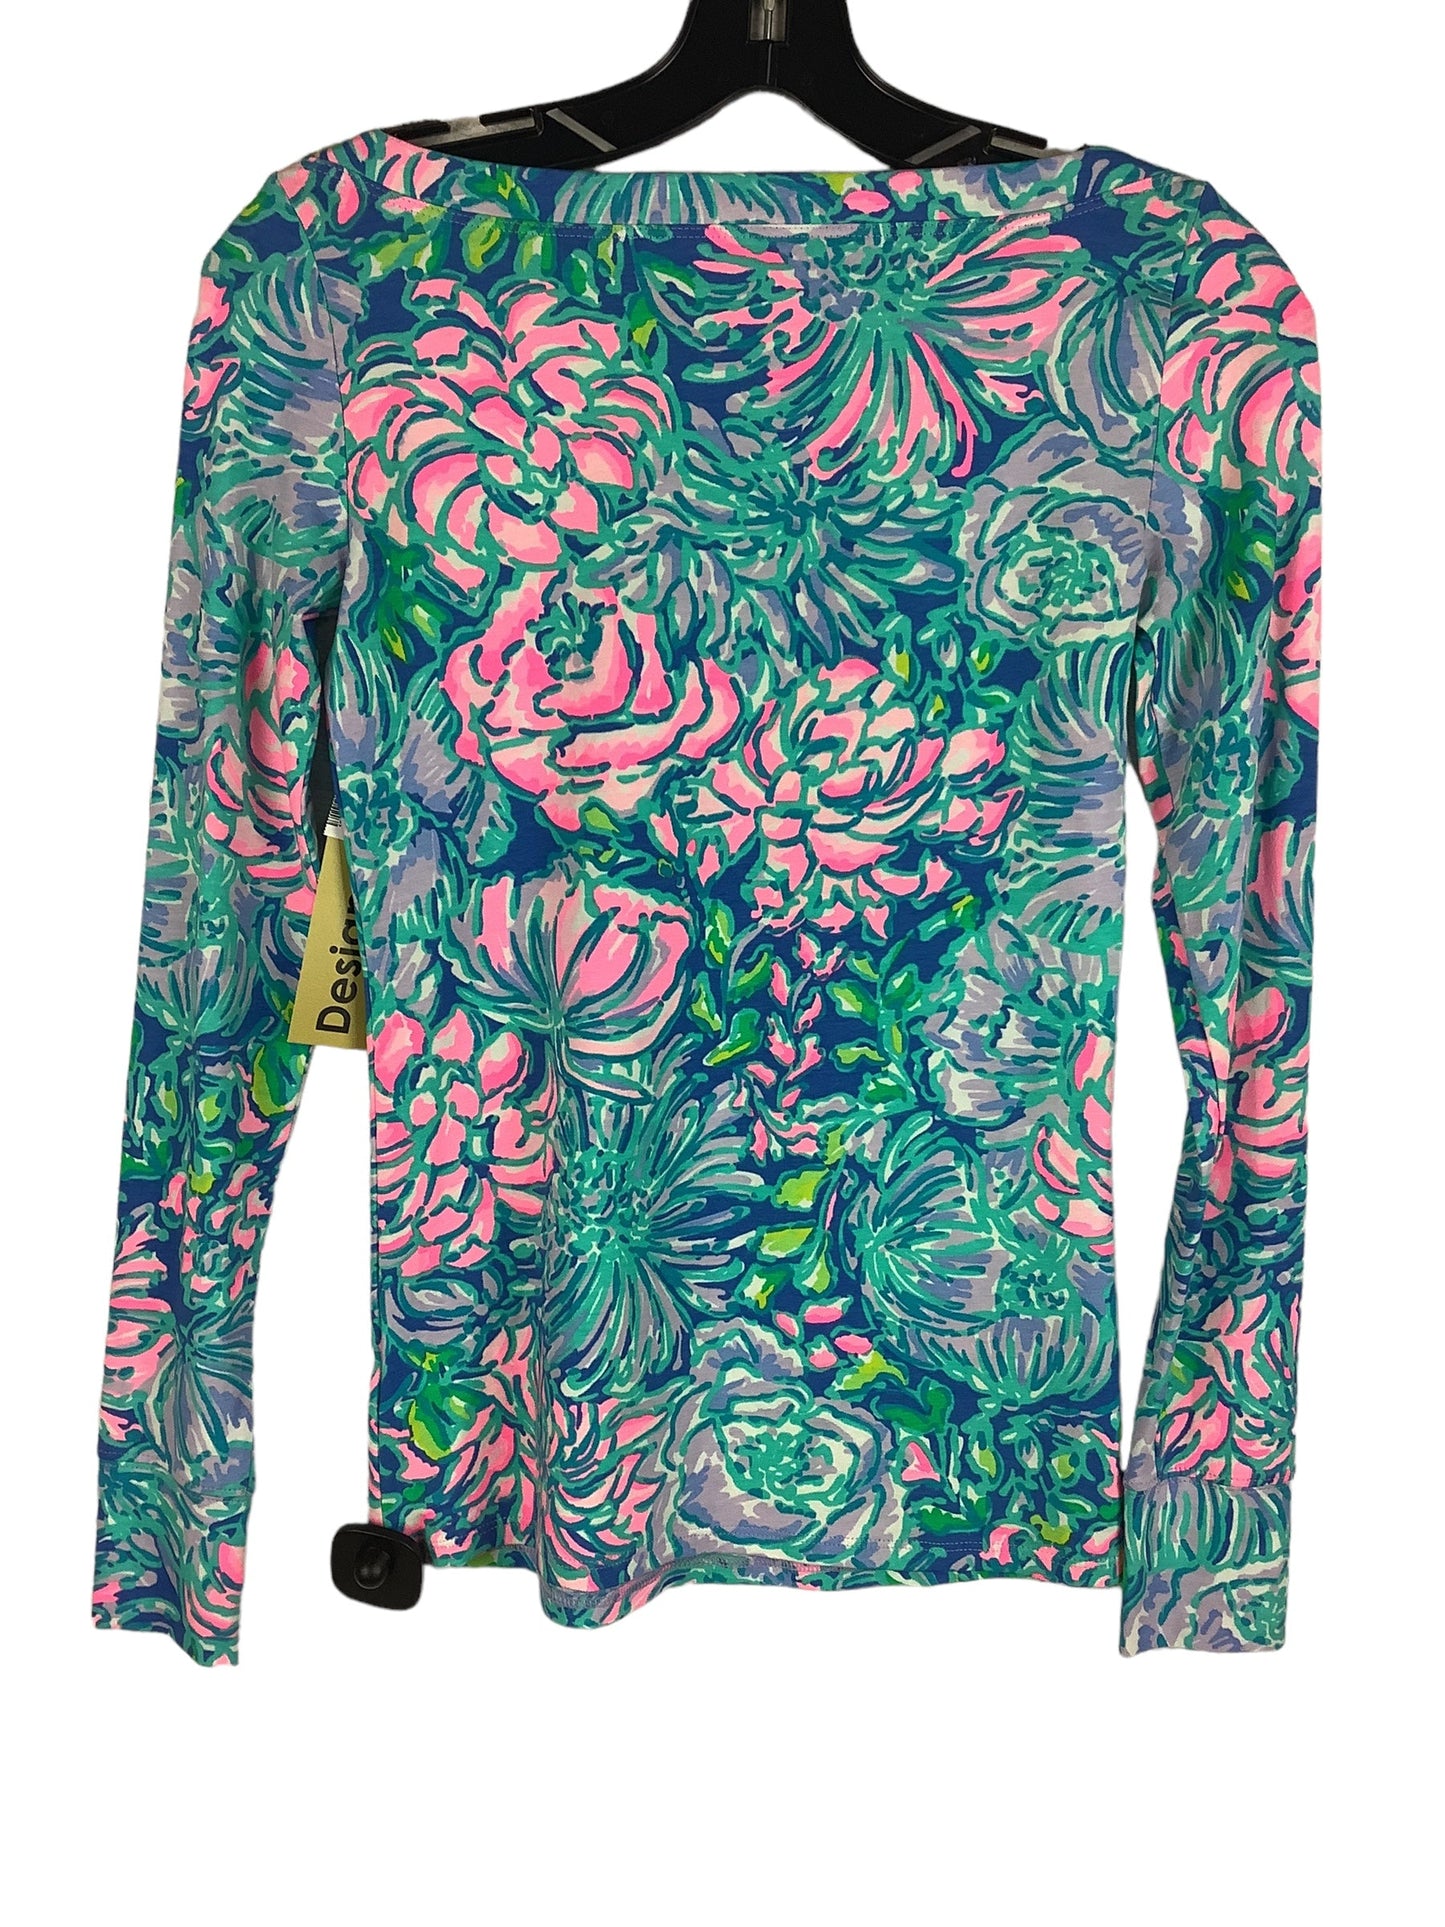 Top Long Sleeve Designer By Lilly Pulitzer  Size: Xxs